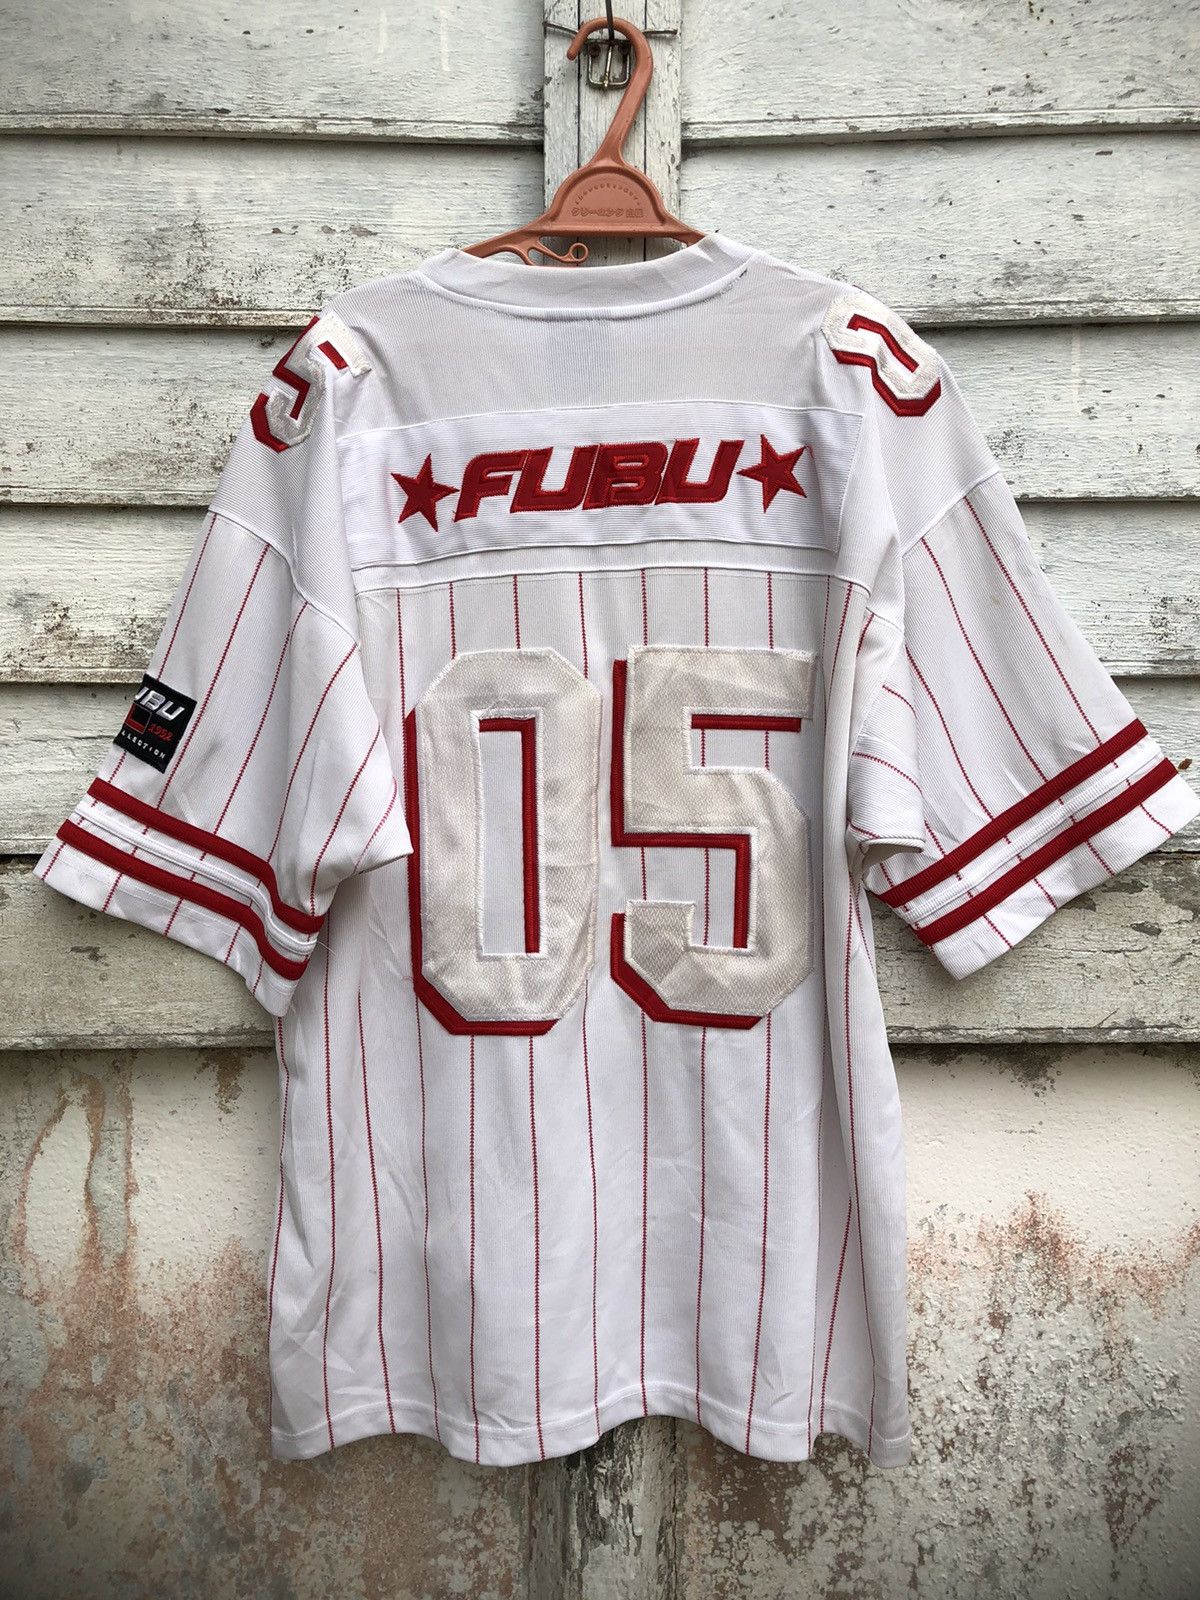 Vintage Limited Fubu 05 Rare Jersey Collection - 3